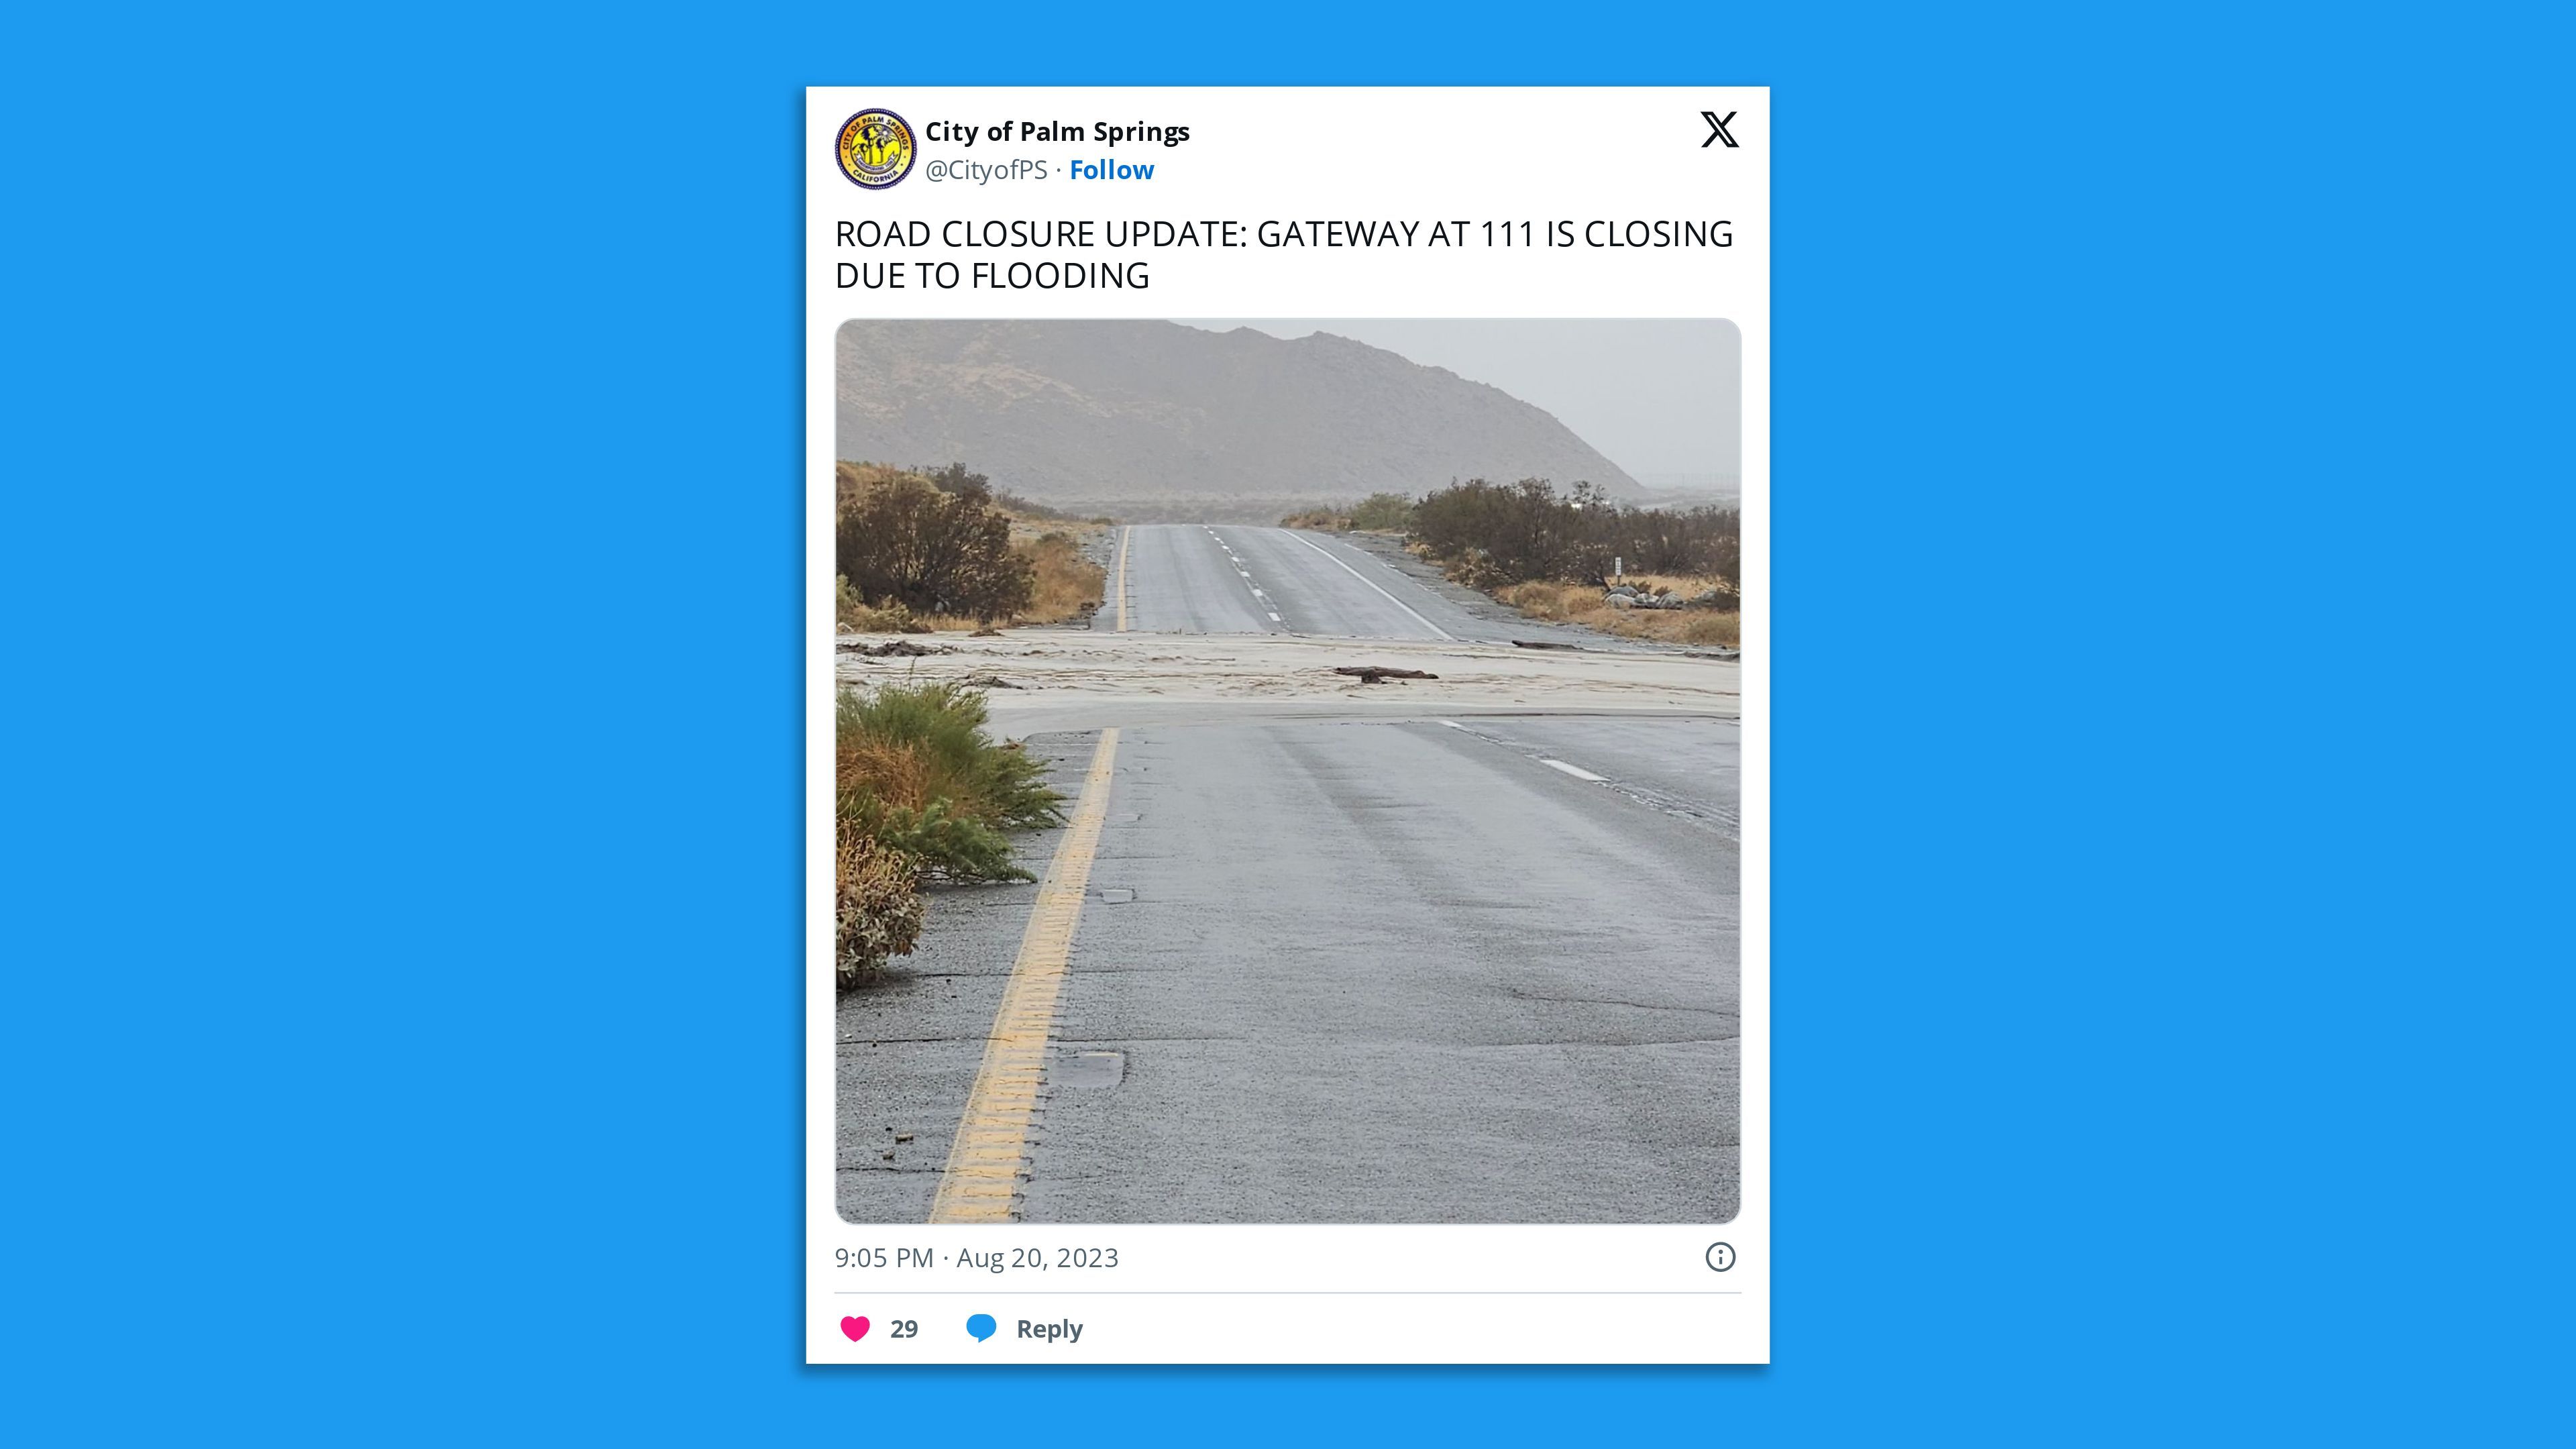 A City of Palm Springs tweet showing a flooded road, saying: "ROAD CLOSURE UPDATE: GATEWAY AT 111 IS CLOSING DUE TO FLOODING."